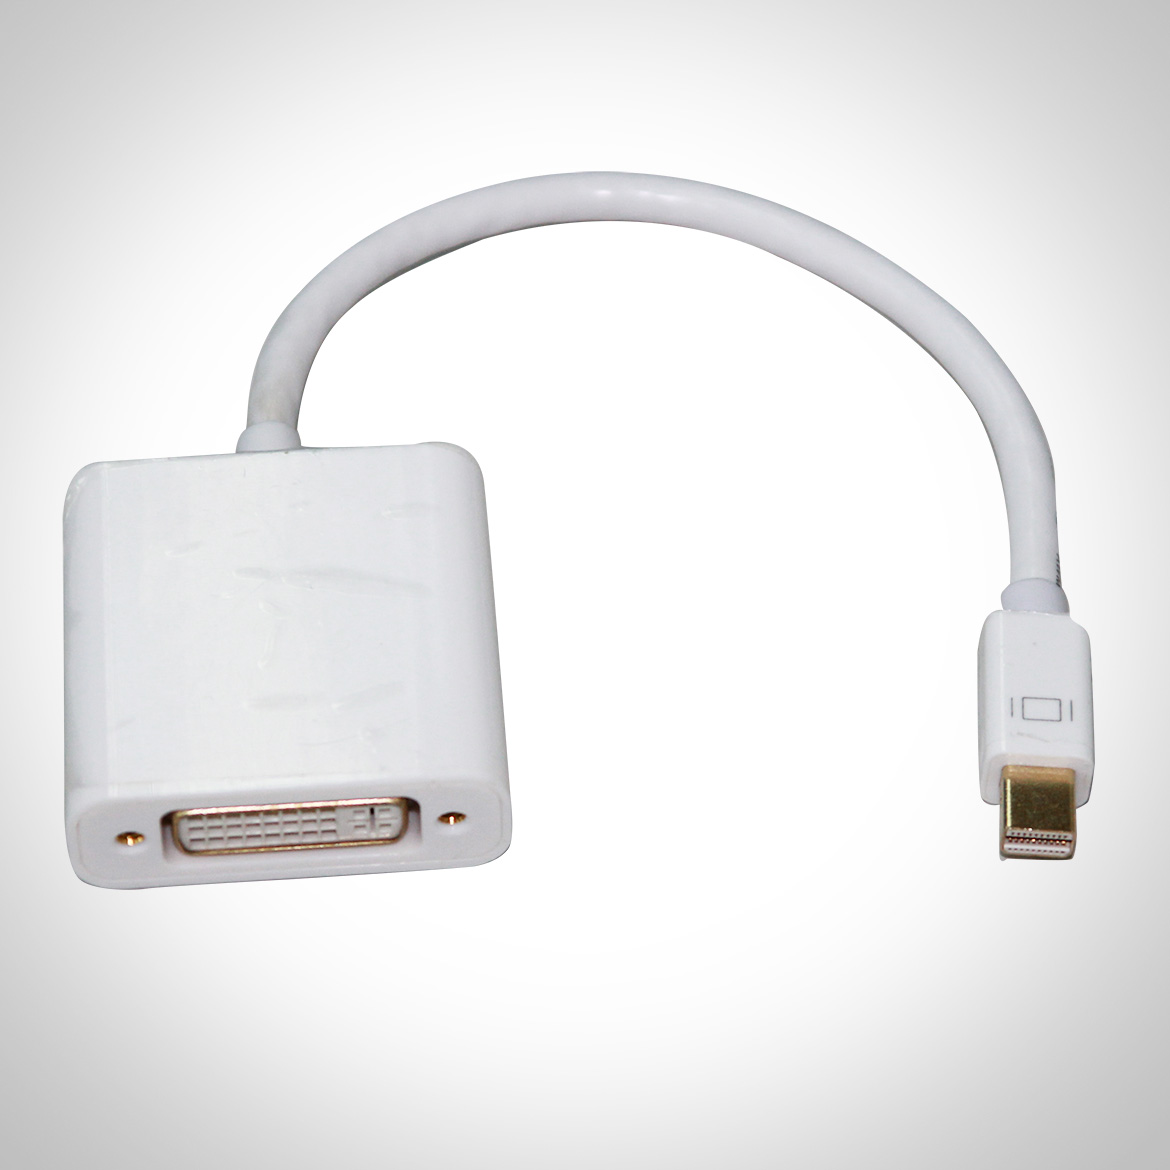 Dongle Cable